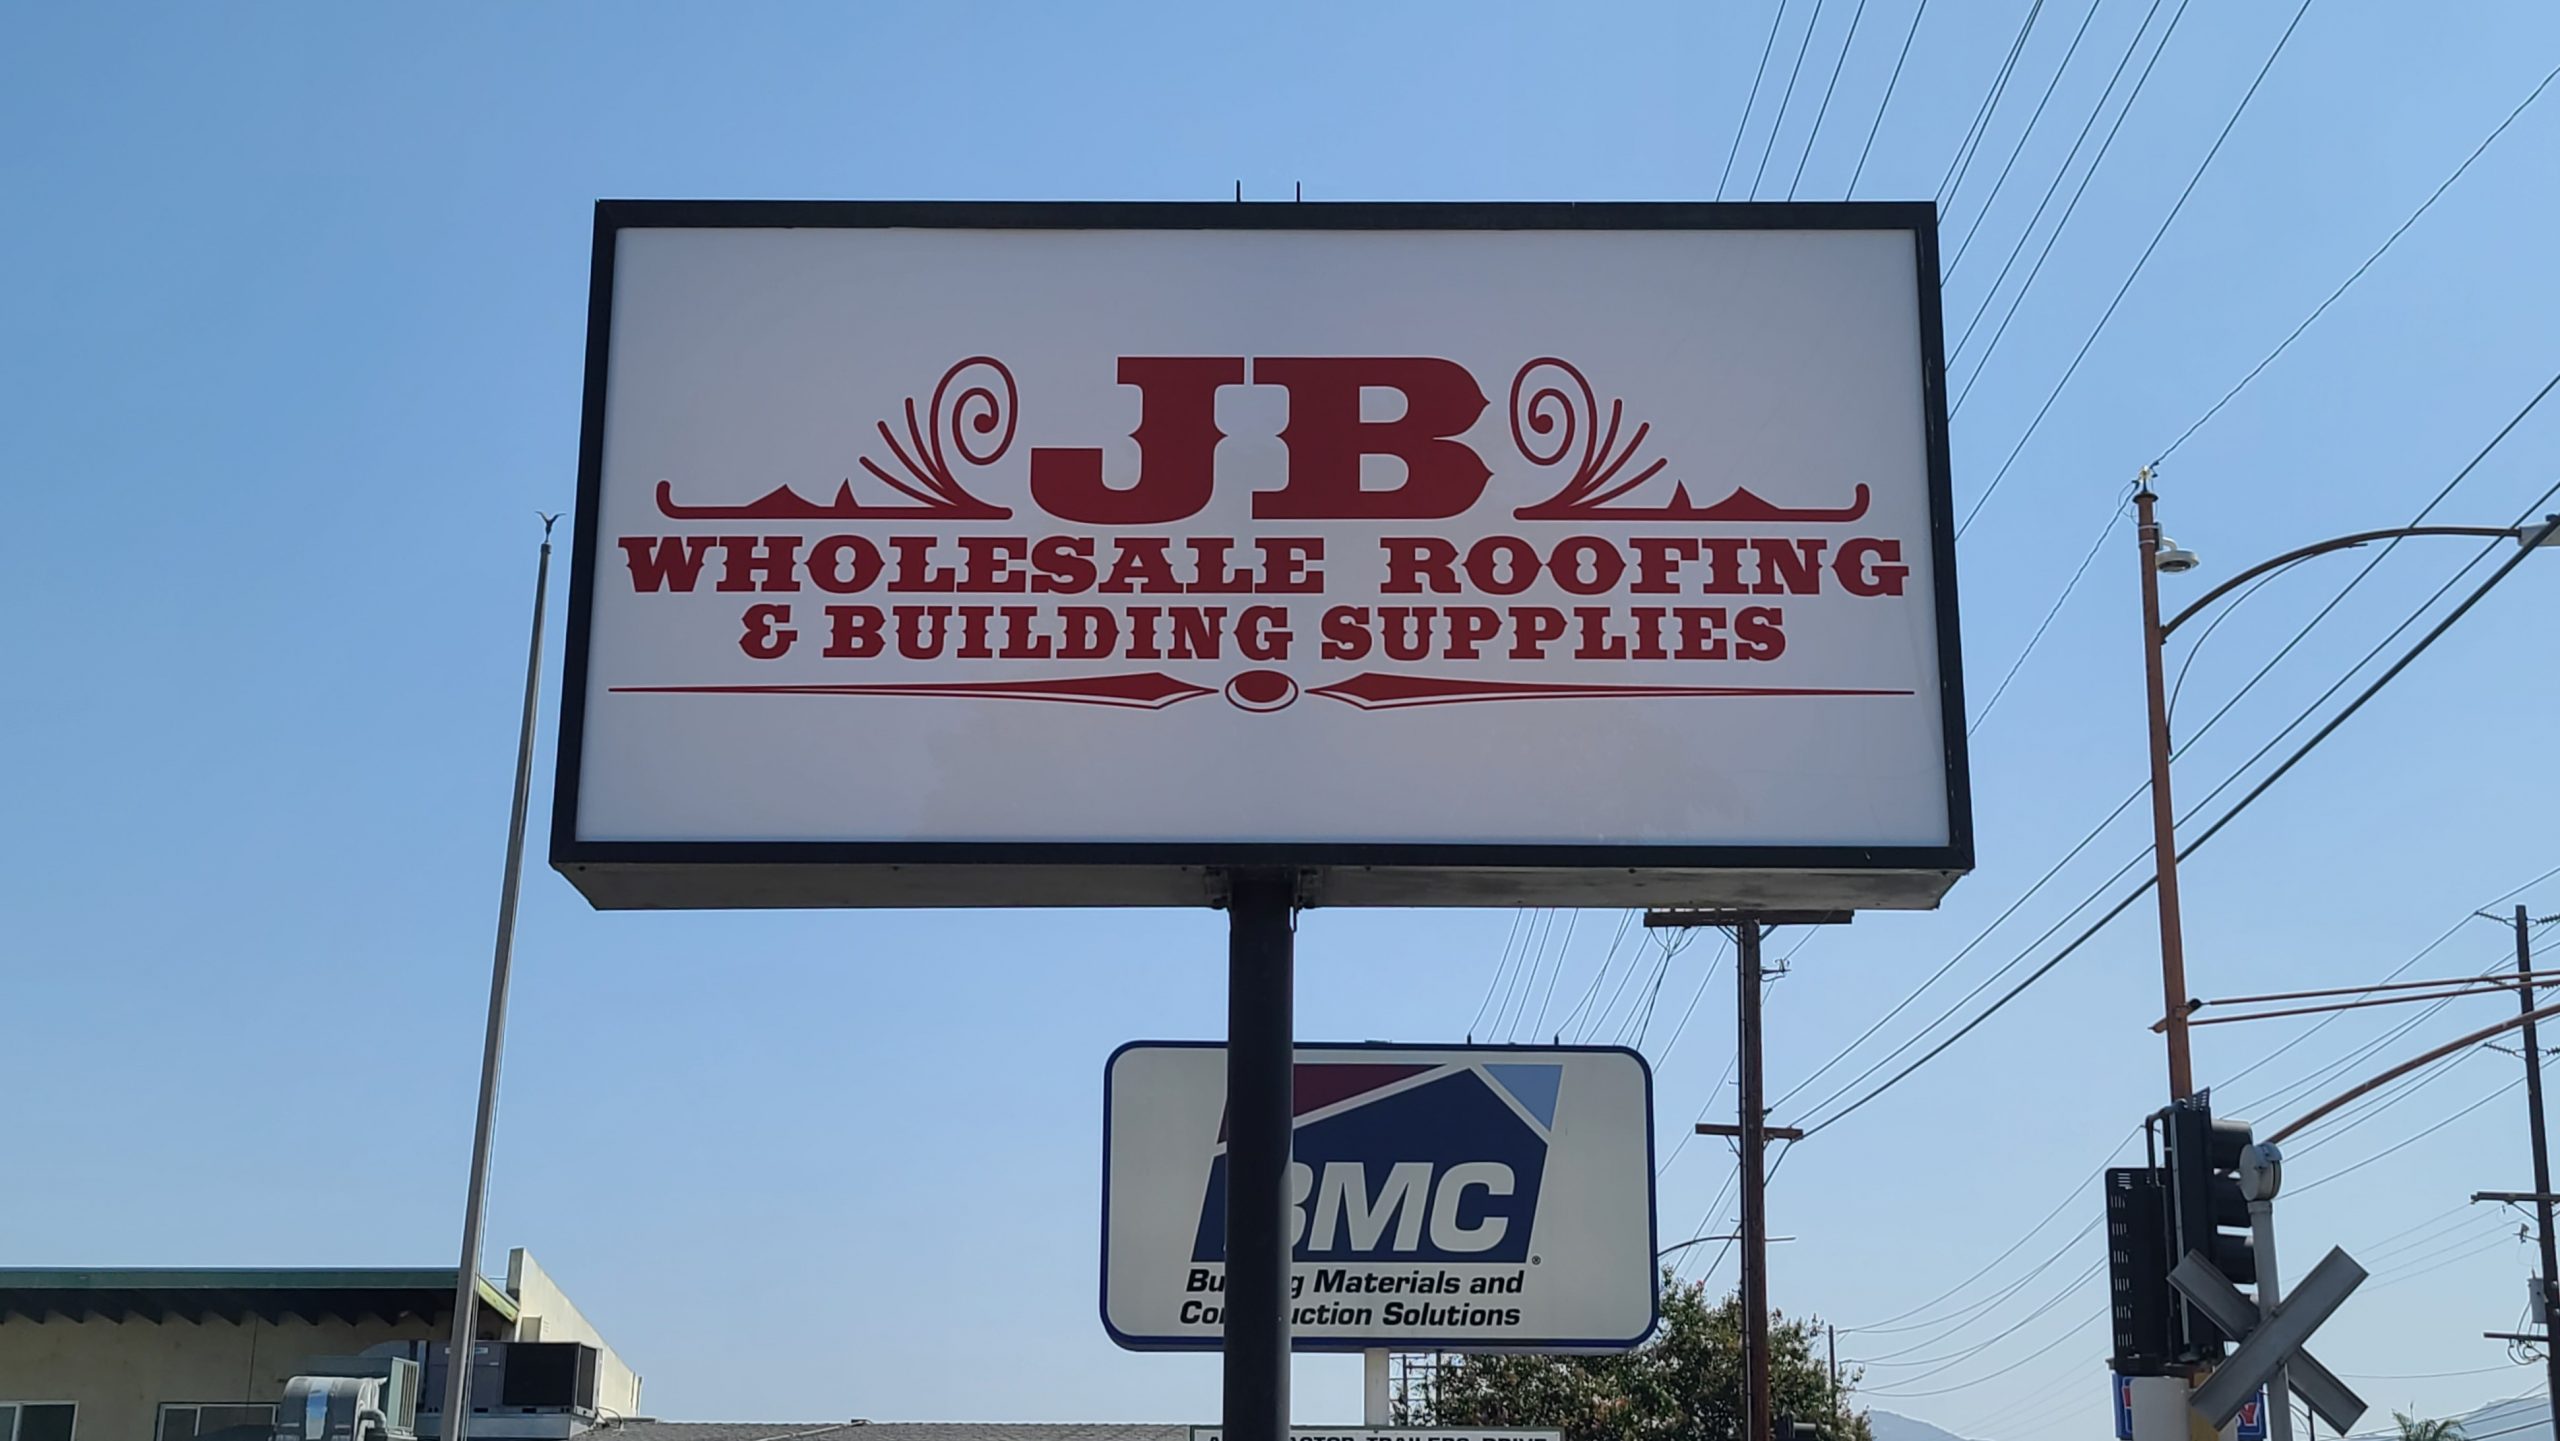 More from our extensive sign package for JB Wholesale Roofing & Building Supplies, this time it's lexan print light box sign inserts for their Burbank branch.